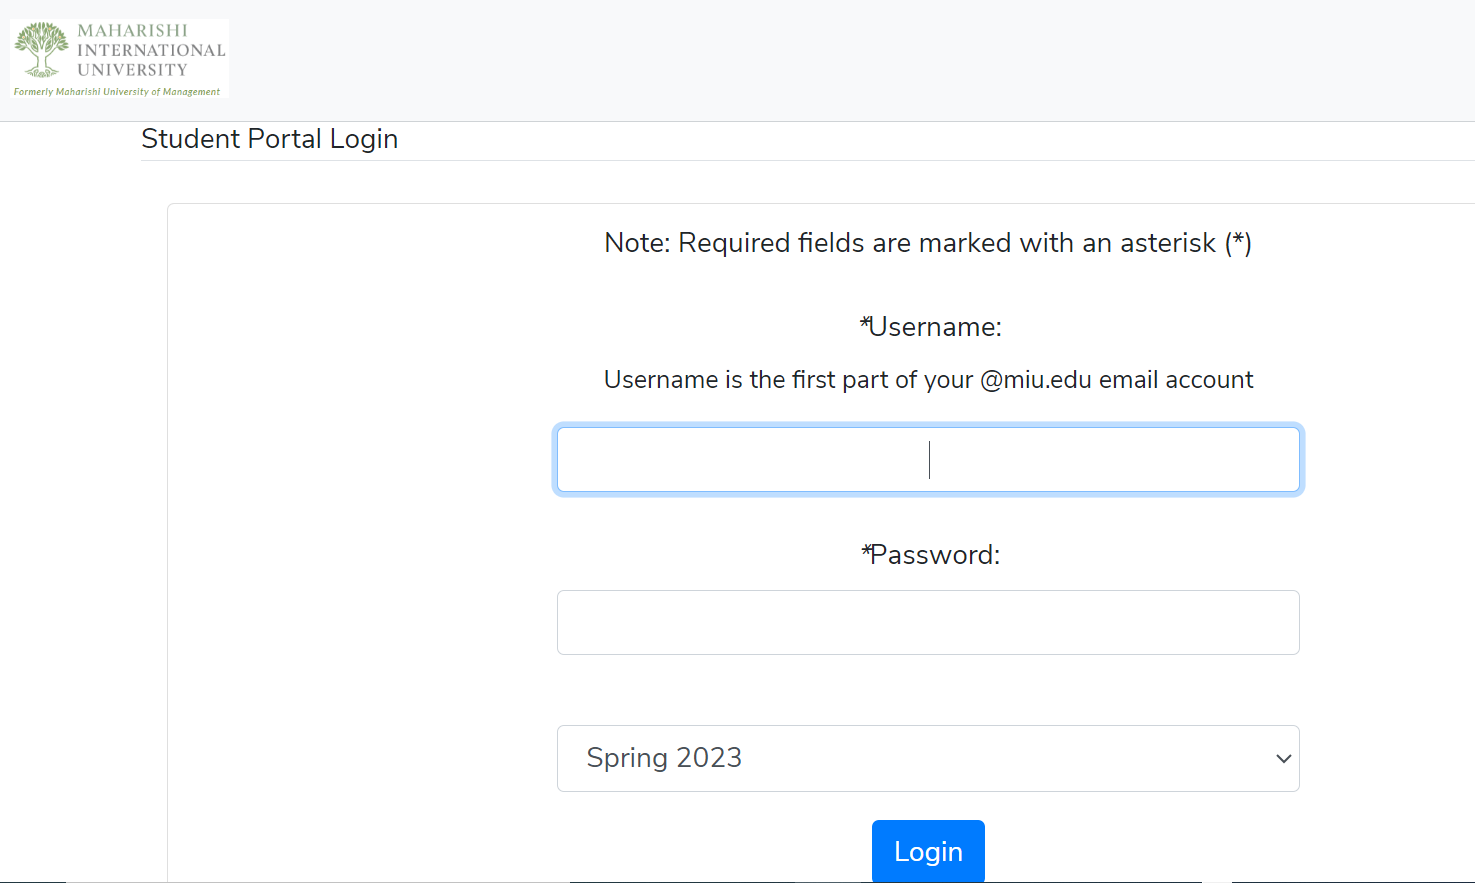 How to Login to the STU student portal